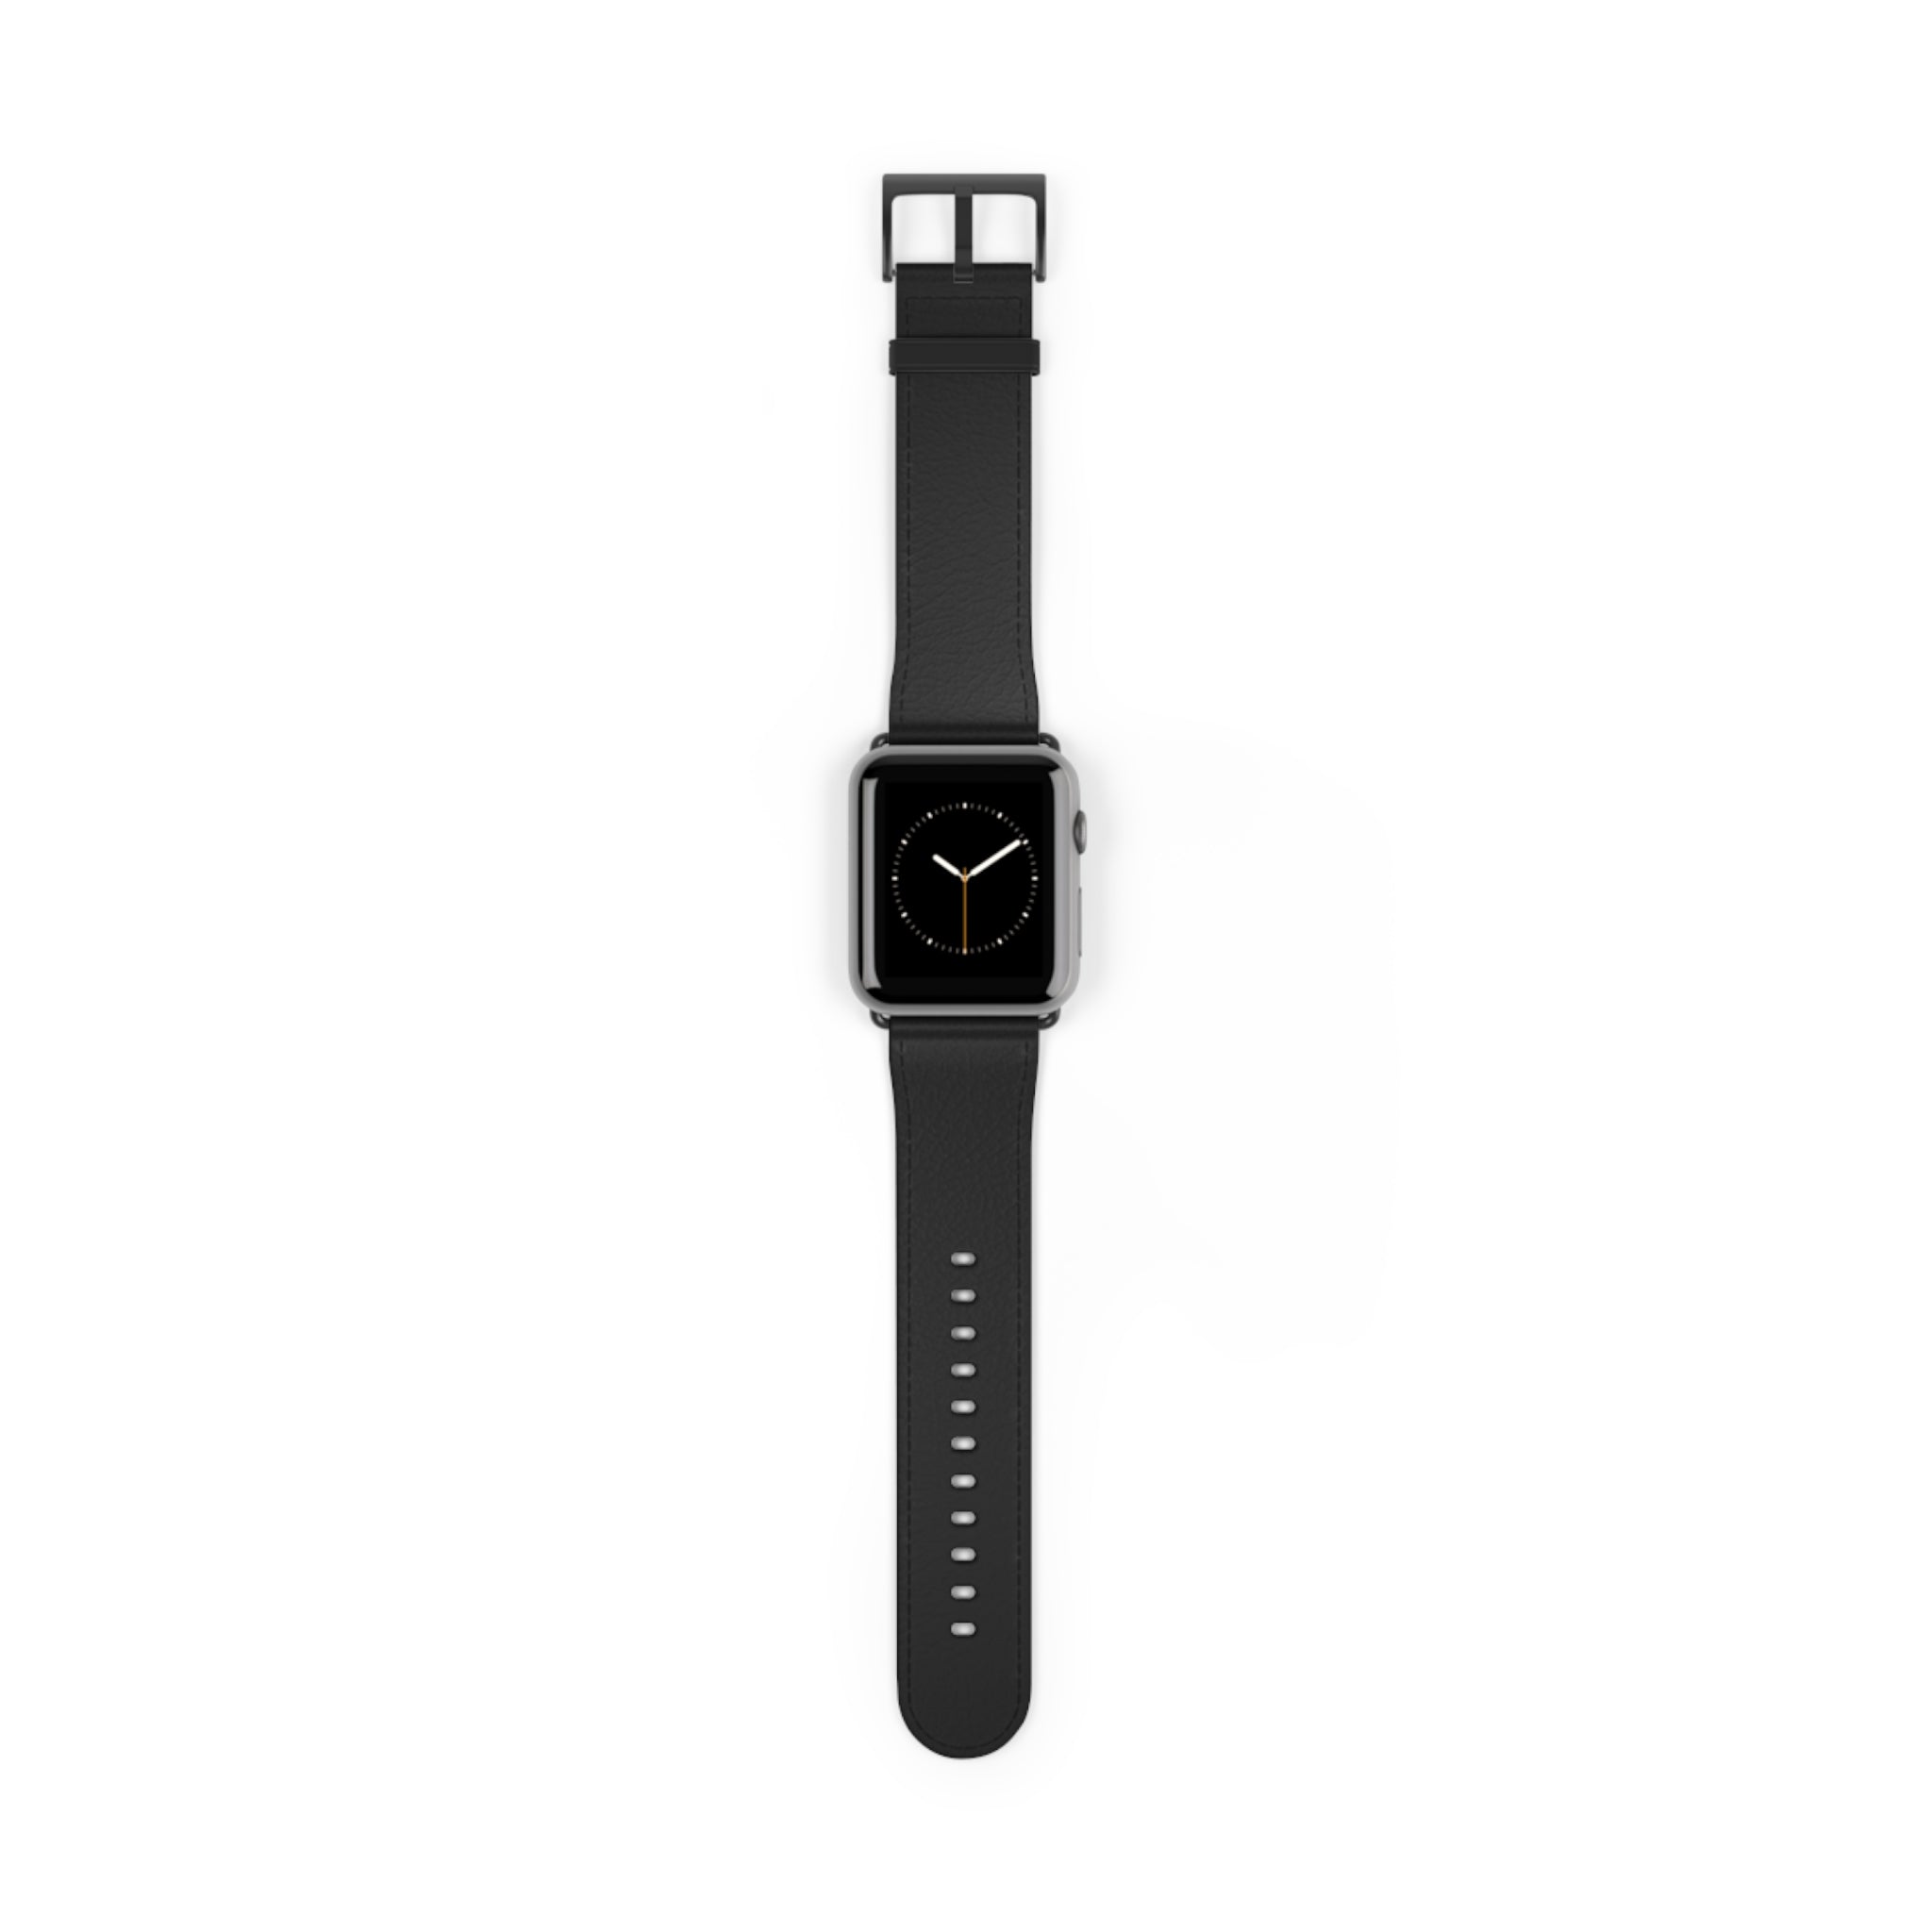 Classic Solid Black Color Faux Leather Apple Watch Wrist Band